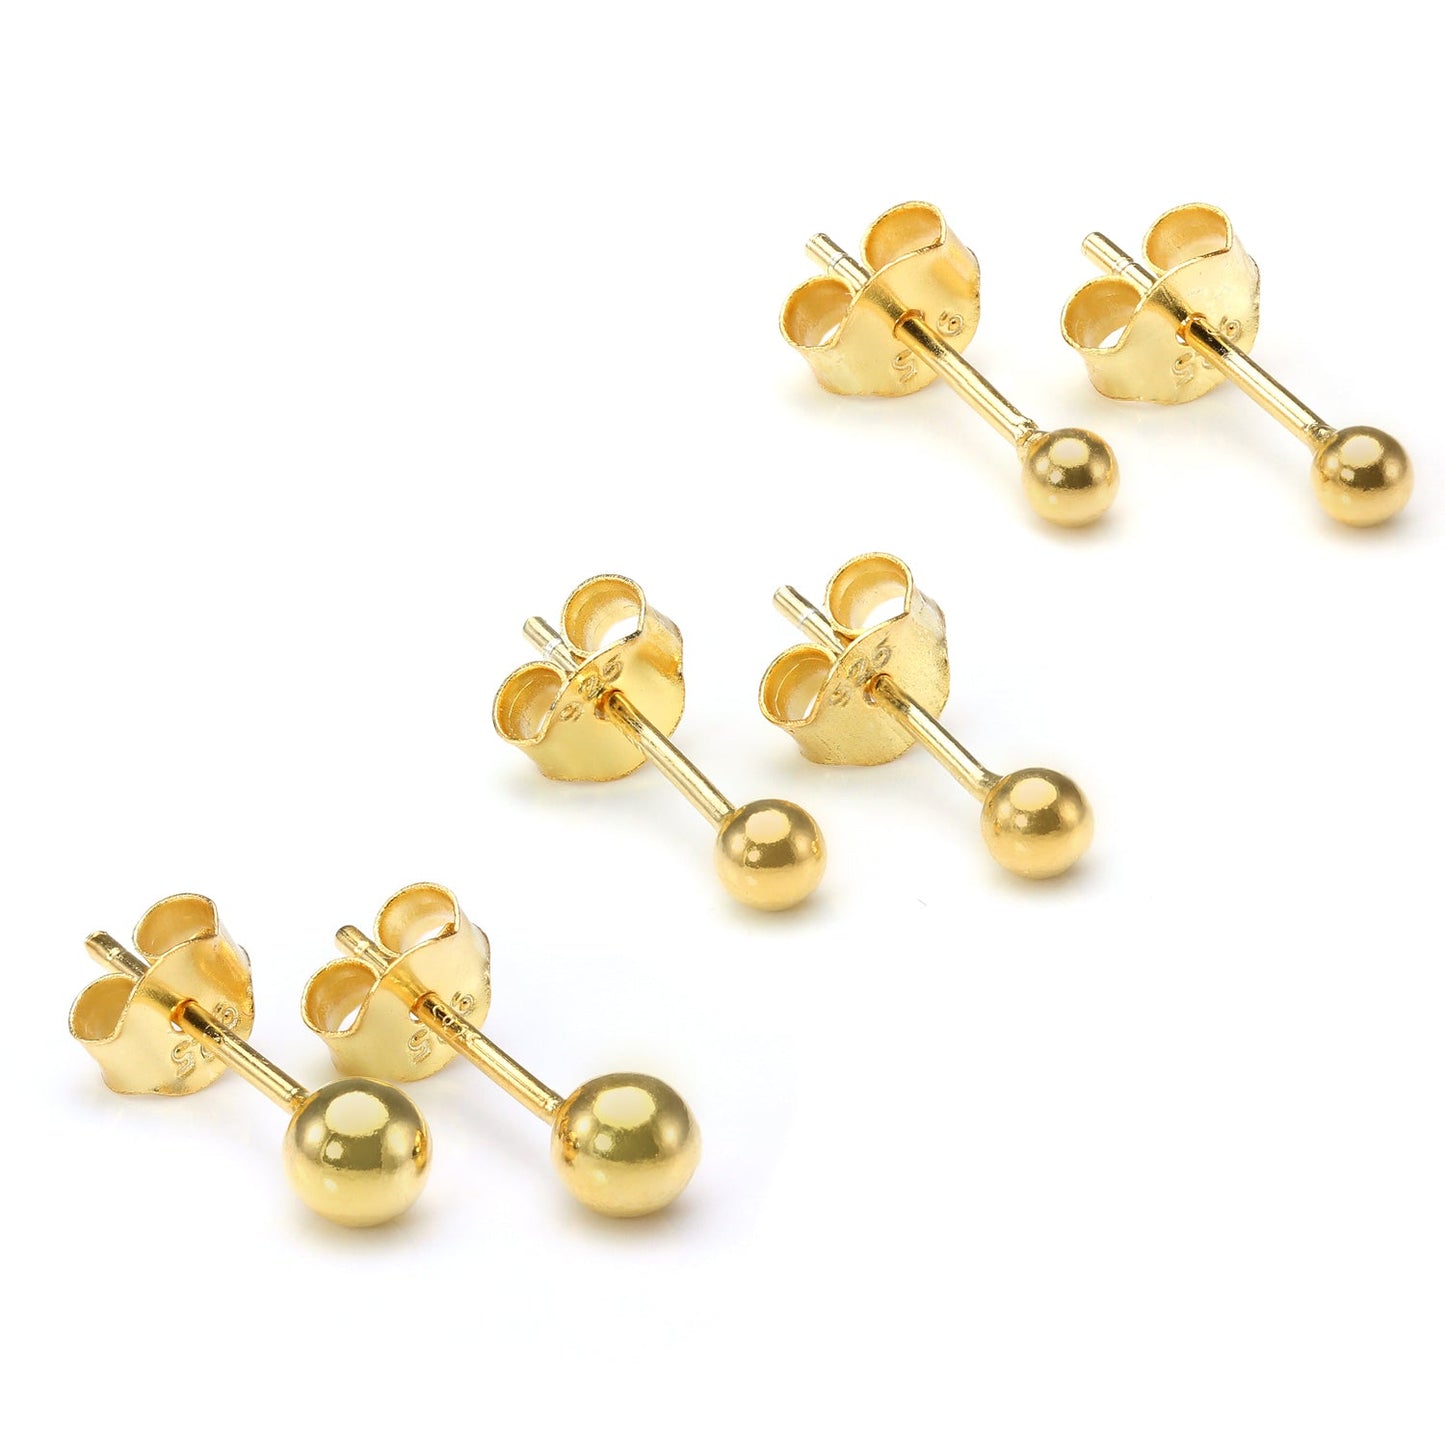 Gold Plated Small Sterling Silver Ball Stud Earrings 2mm - 6mm & Packs - jewellerybox